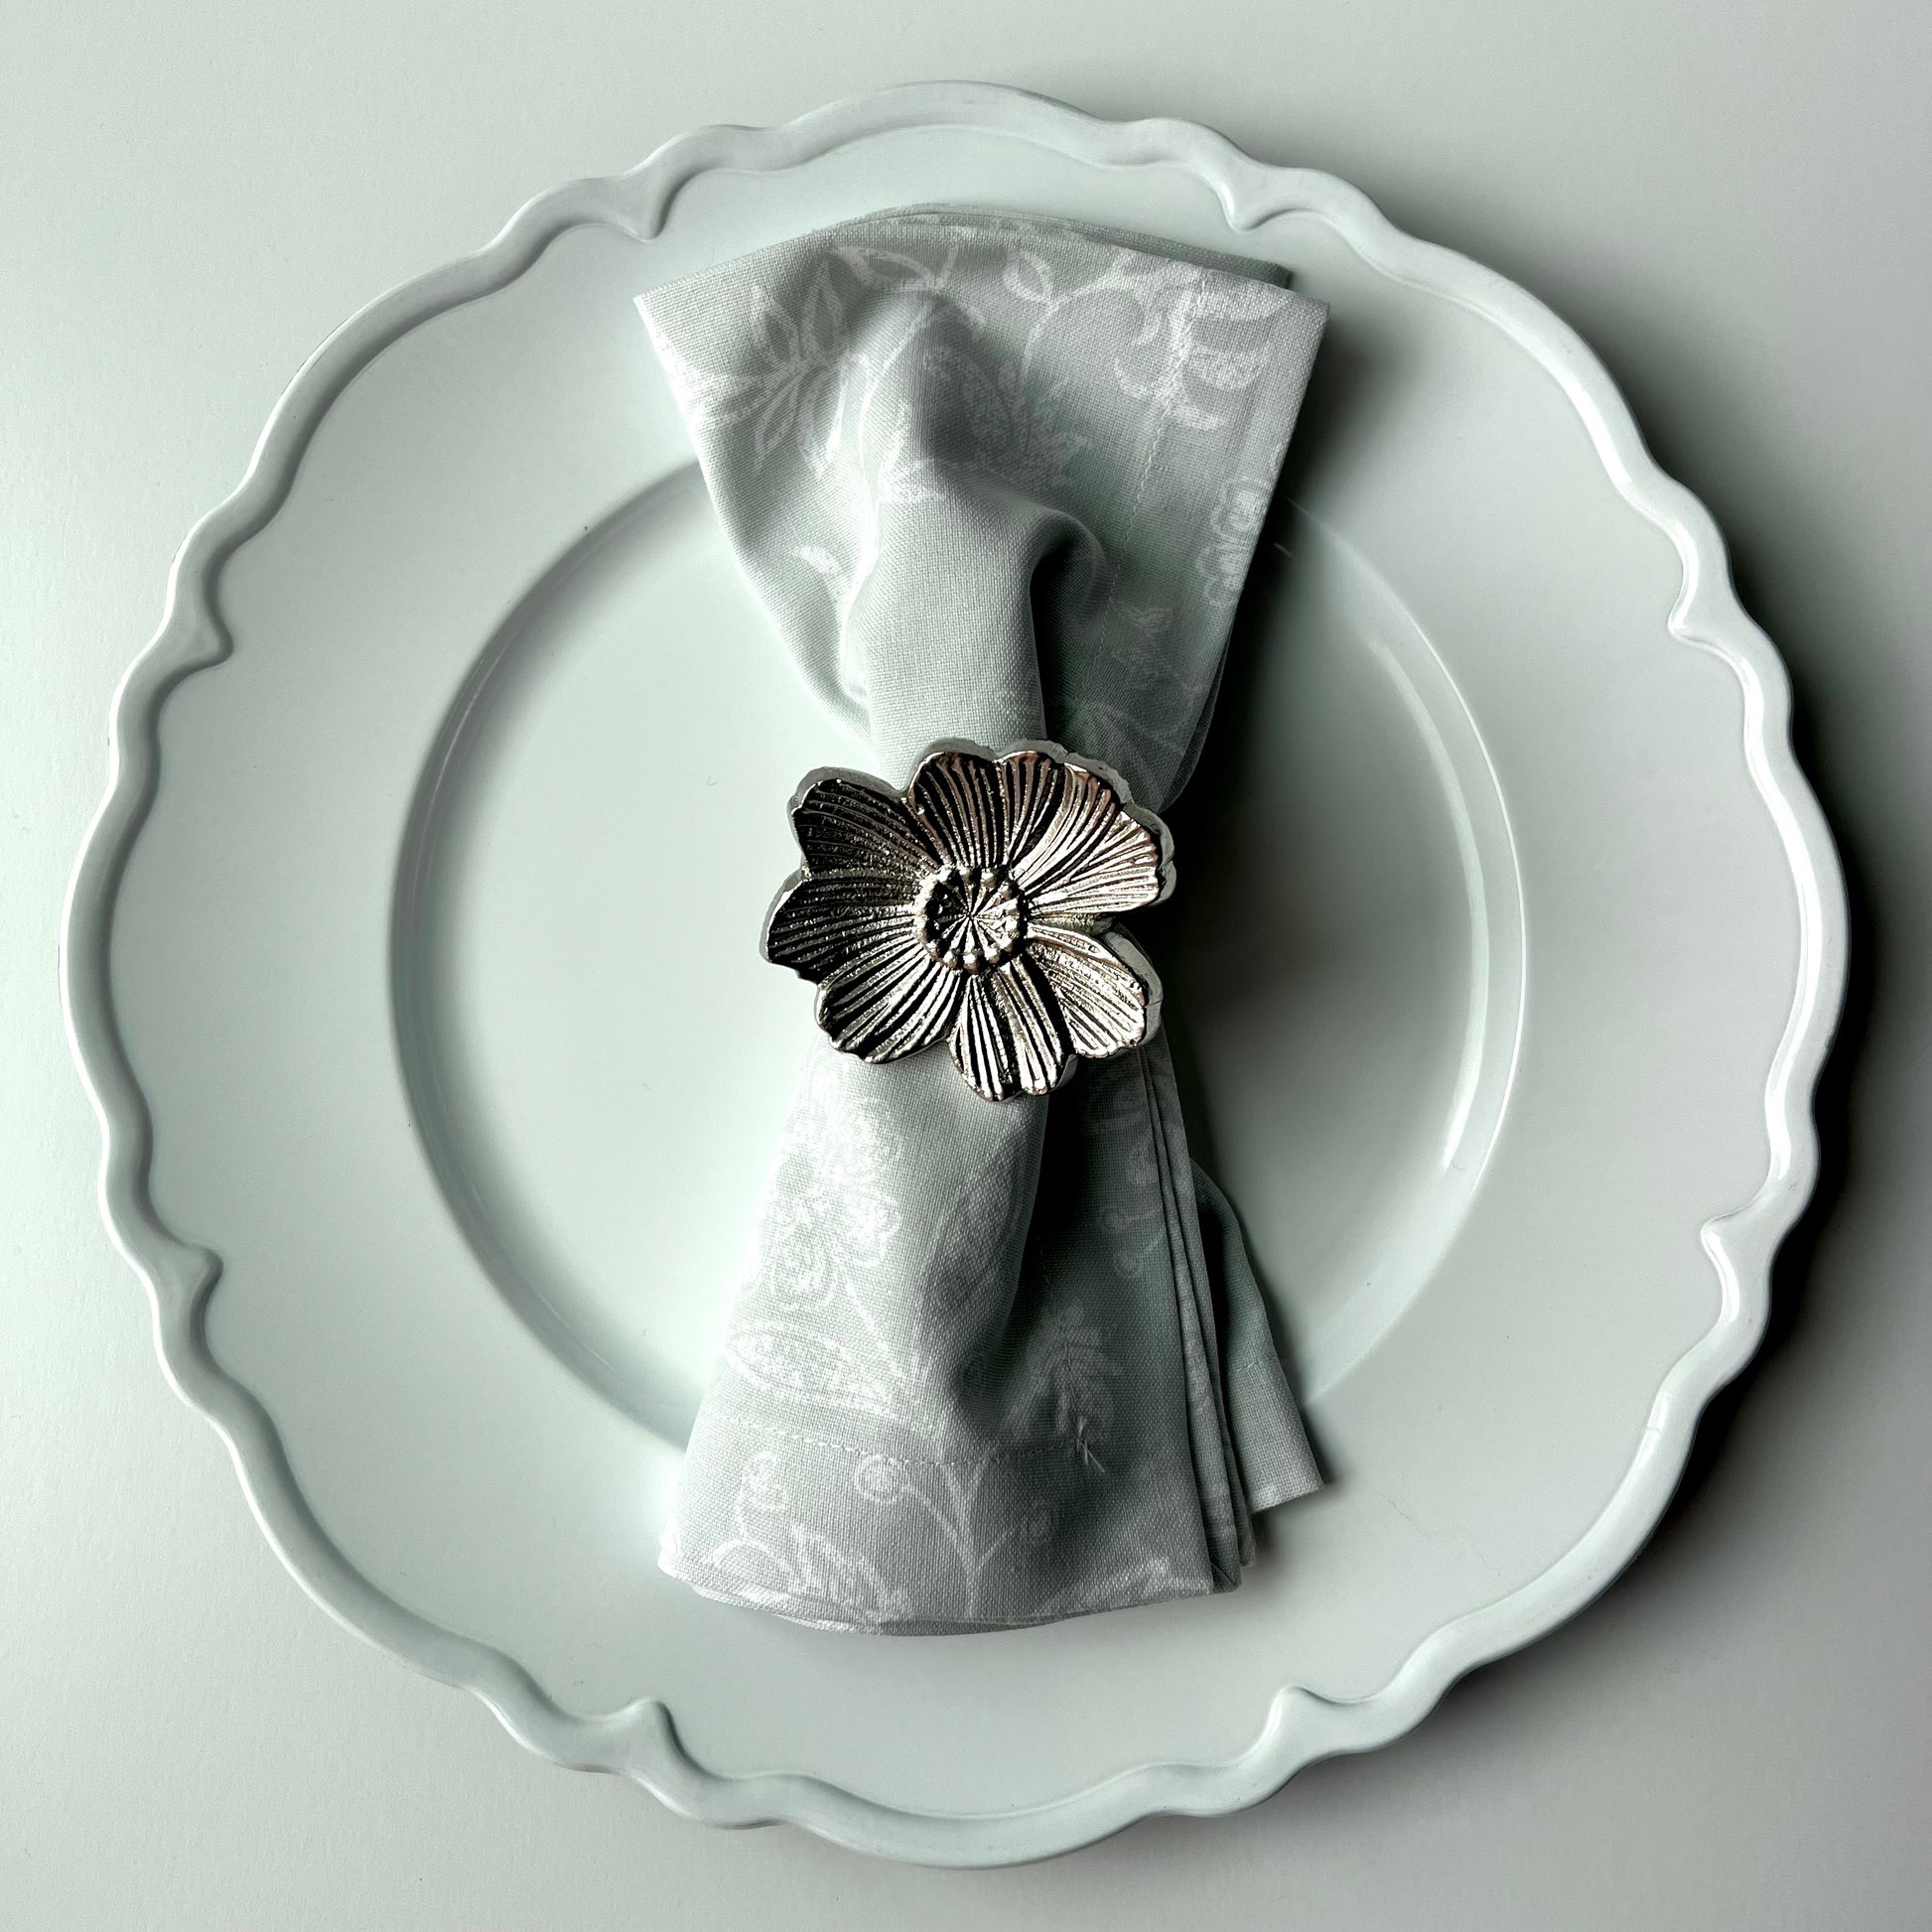 A silver flower napkin ring wrapped around a gray napkin on a white plate against a white background